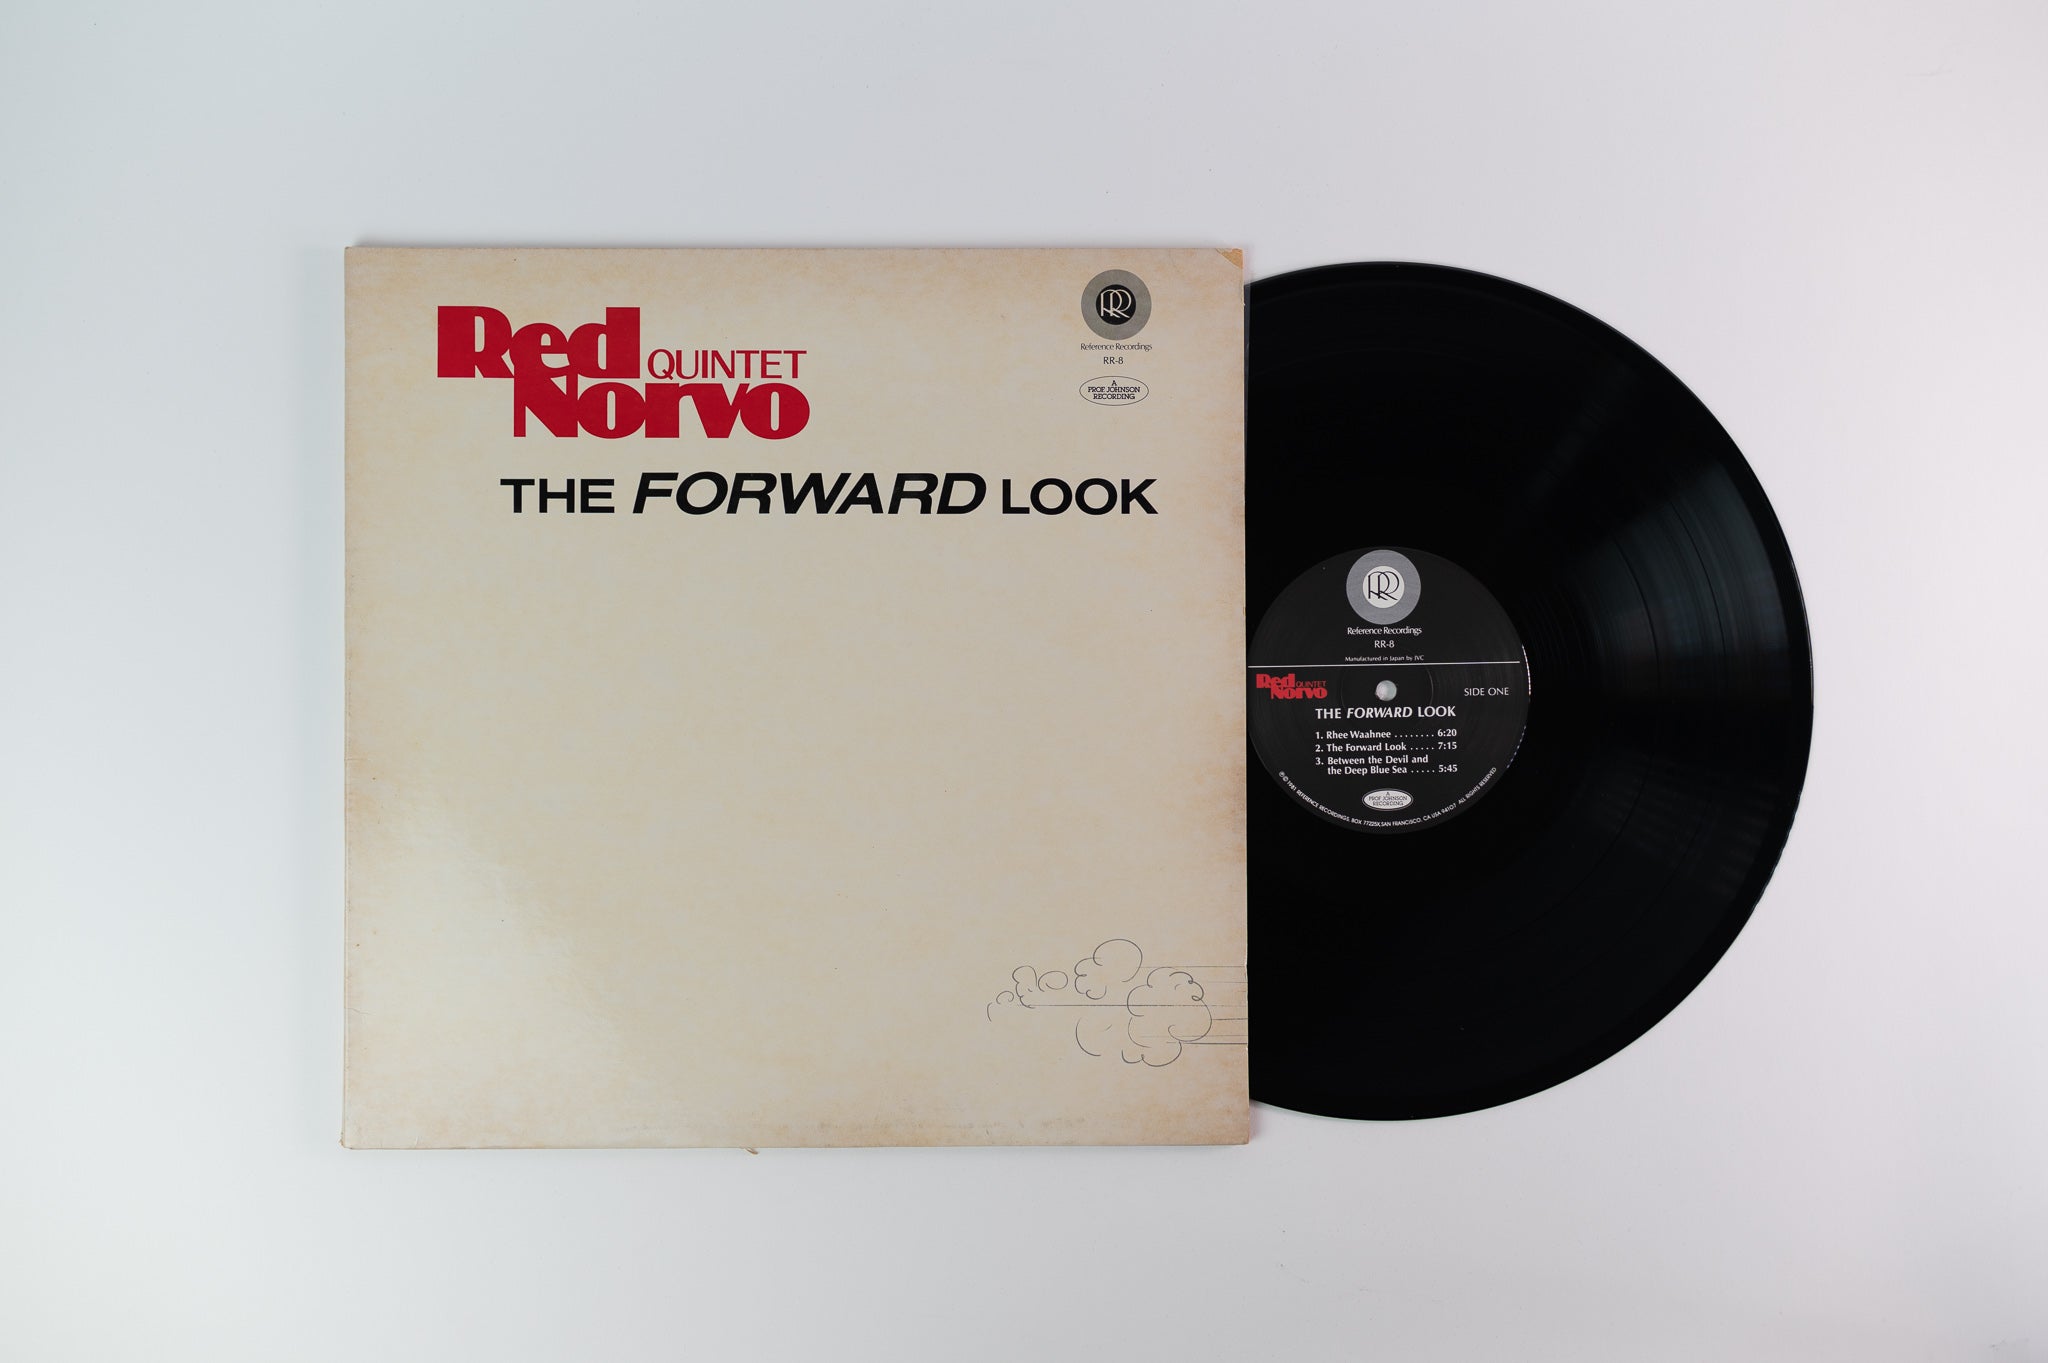 Red Norvo Quintet - The Forward Look on Reference Recordings